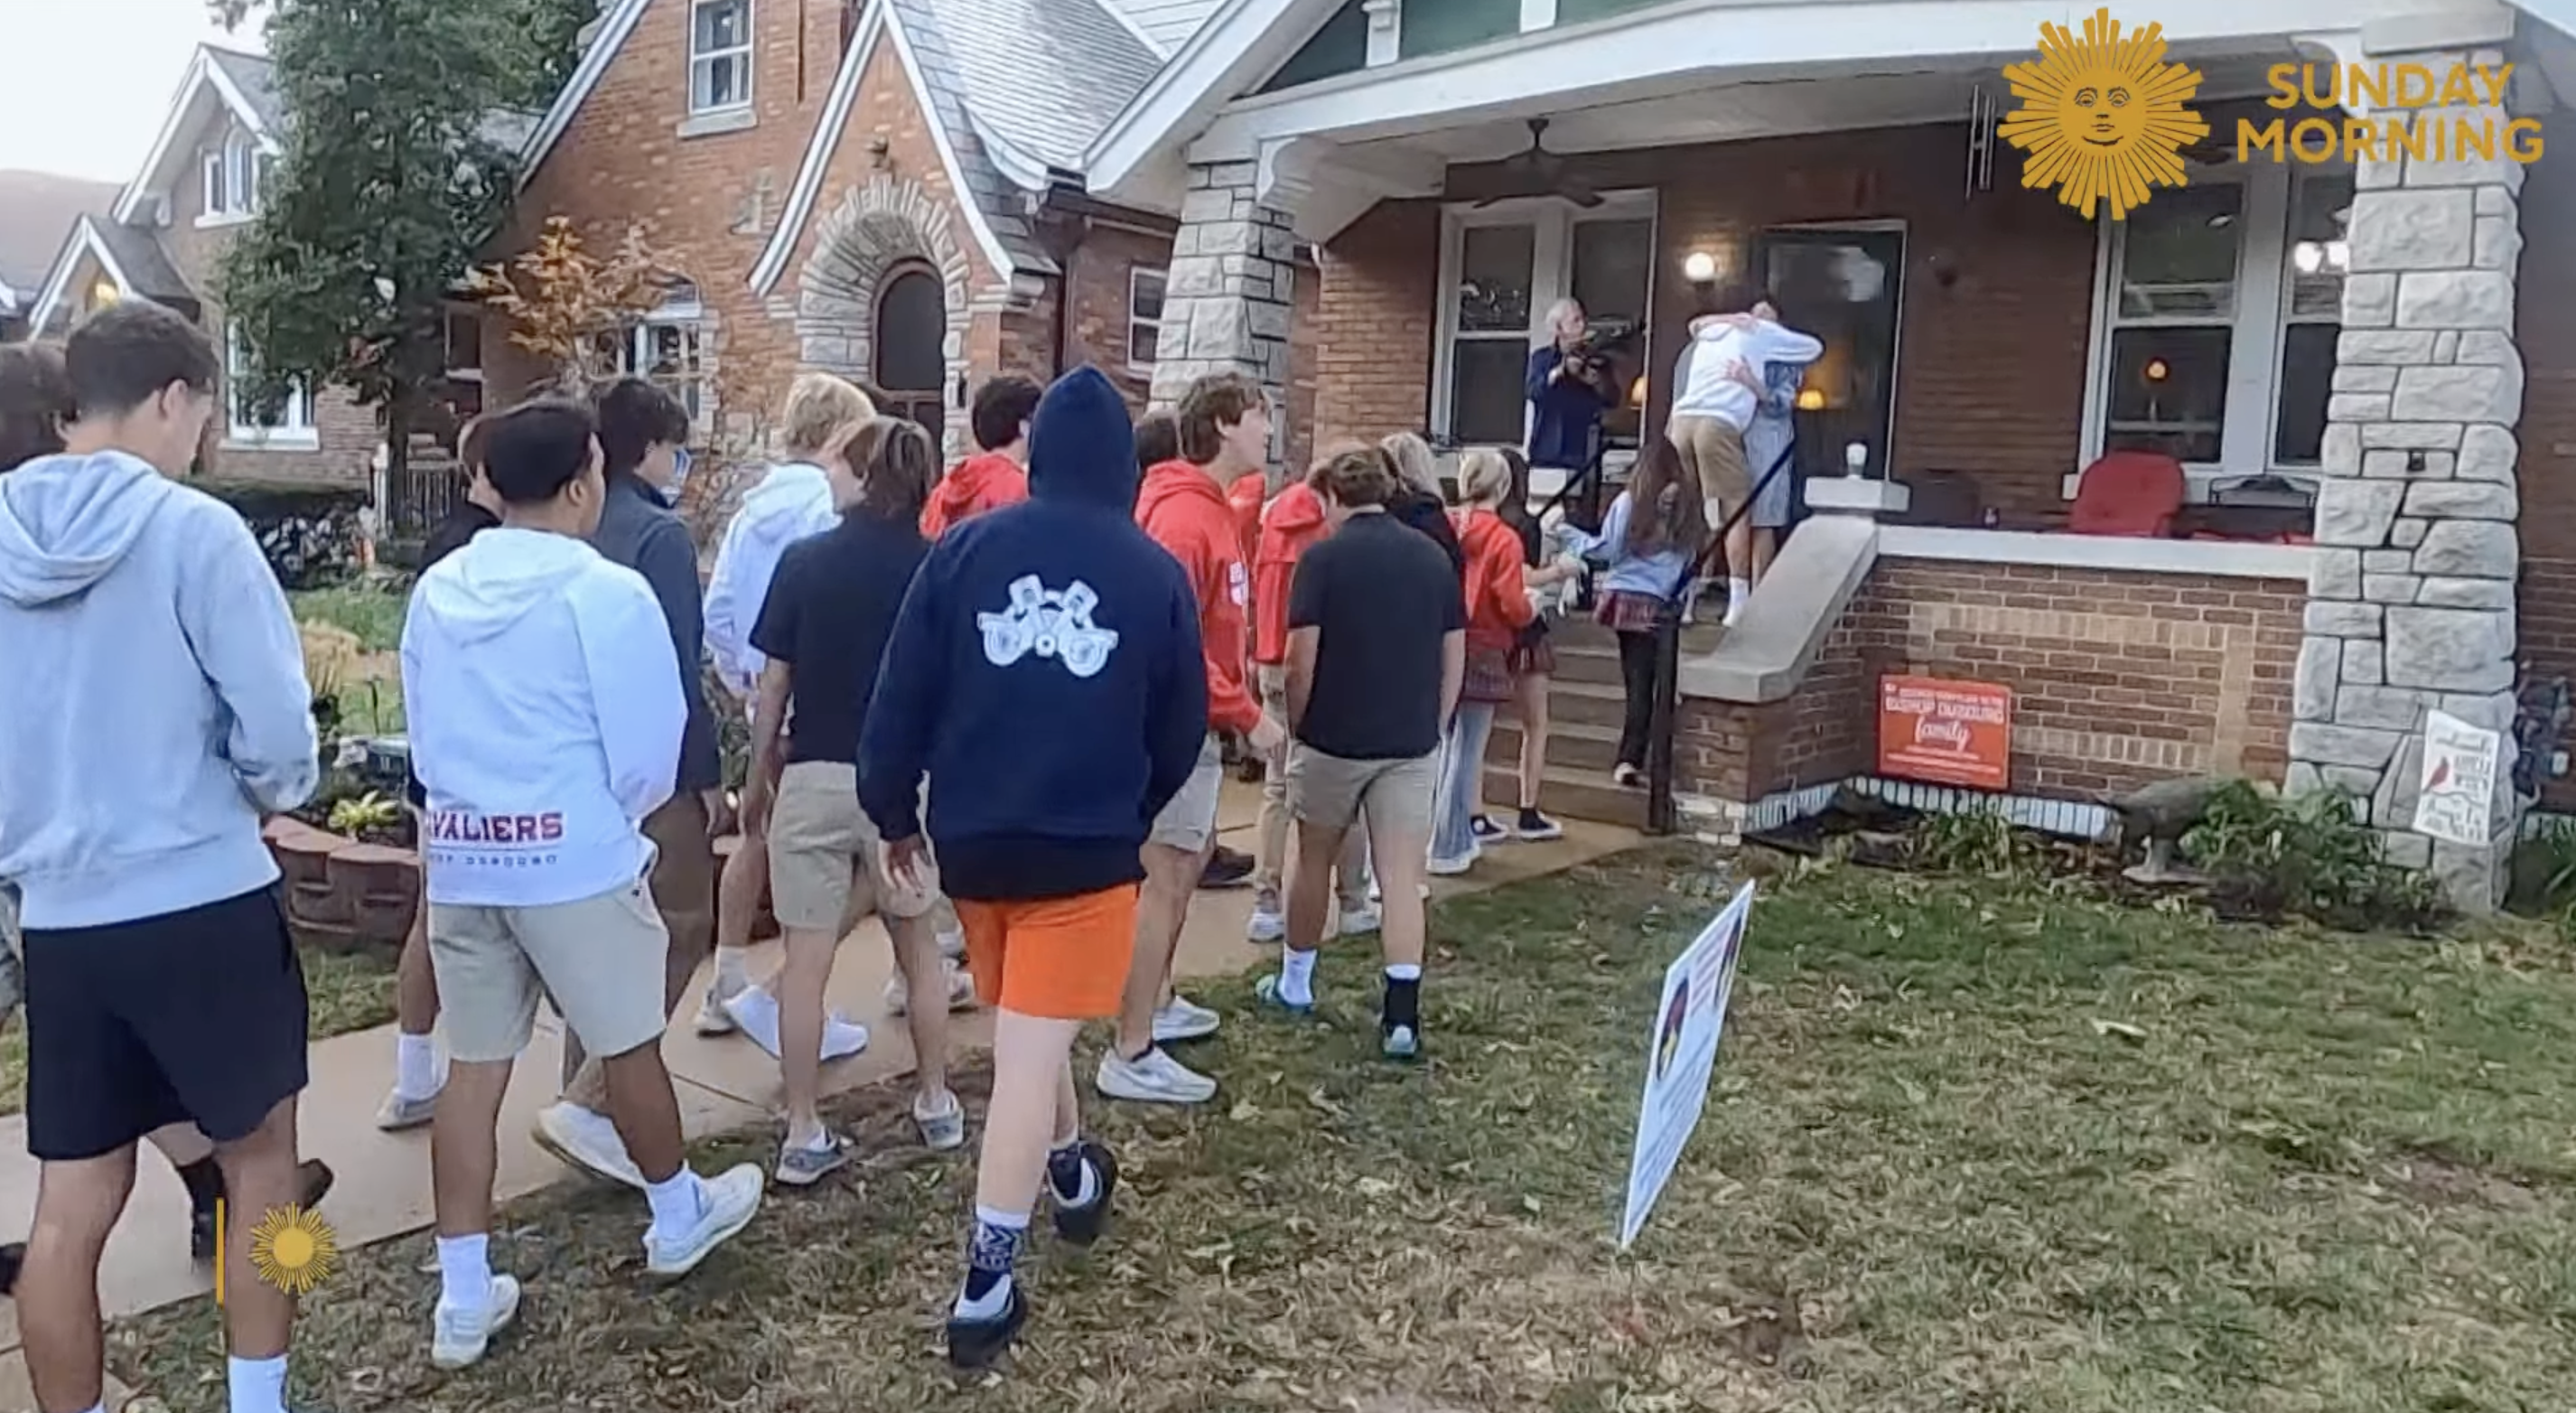 The students line up outside Grandma Peggy's home every Wednesday morning for their weekly breakfast tradition, as seen in a video dated October 22, 2023. | Source: facebook.com/CBSSundayMorning